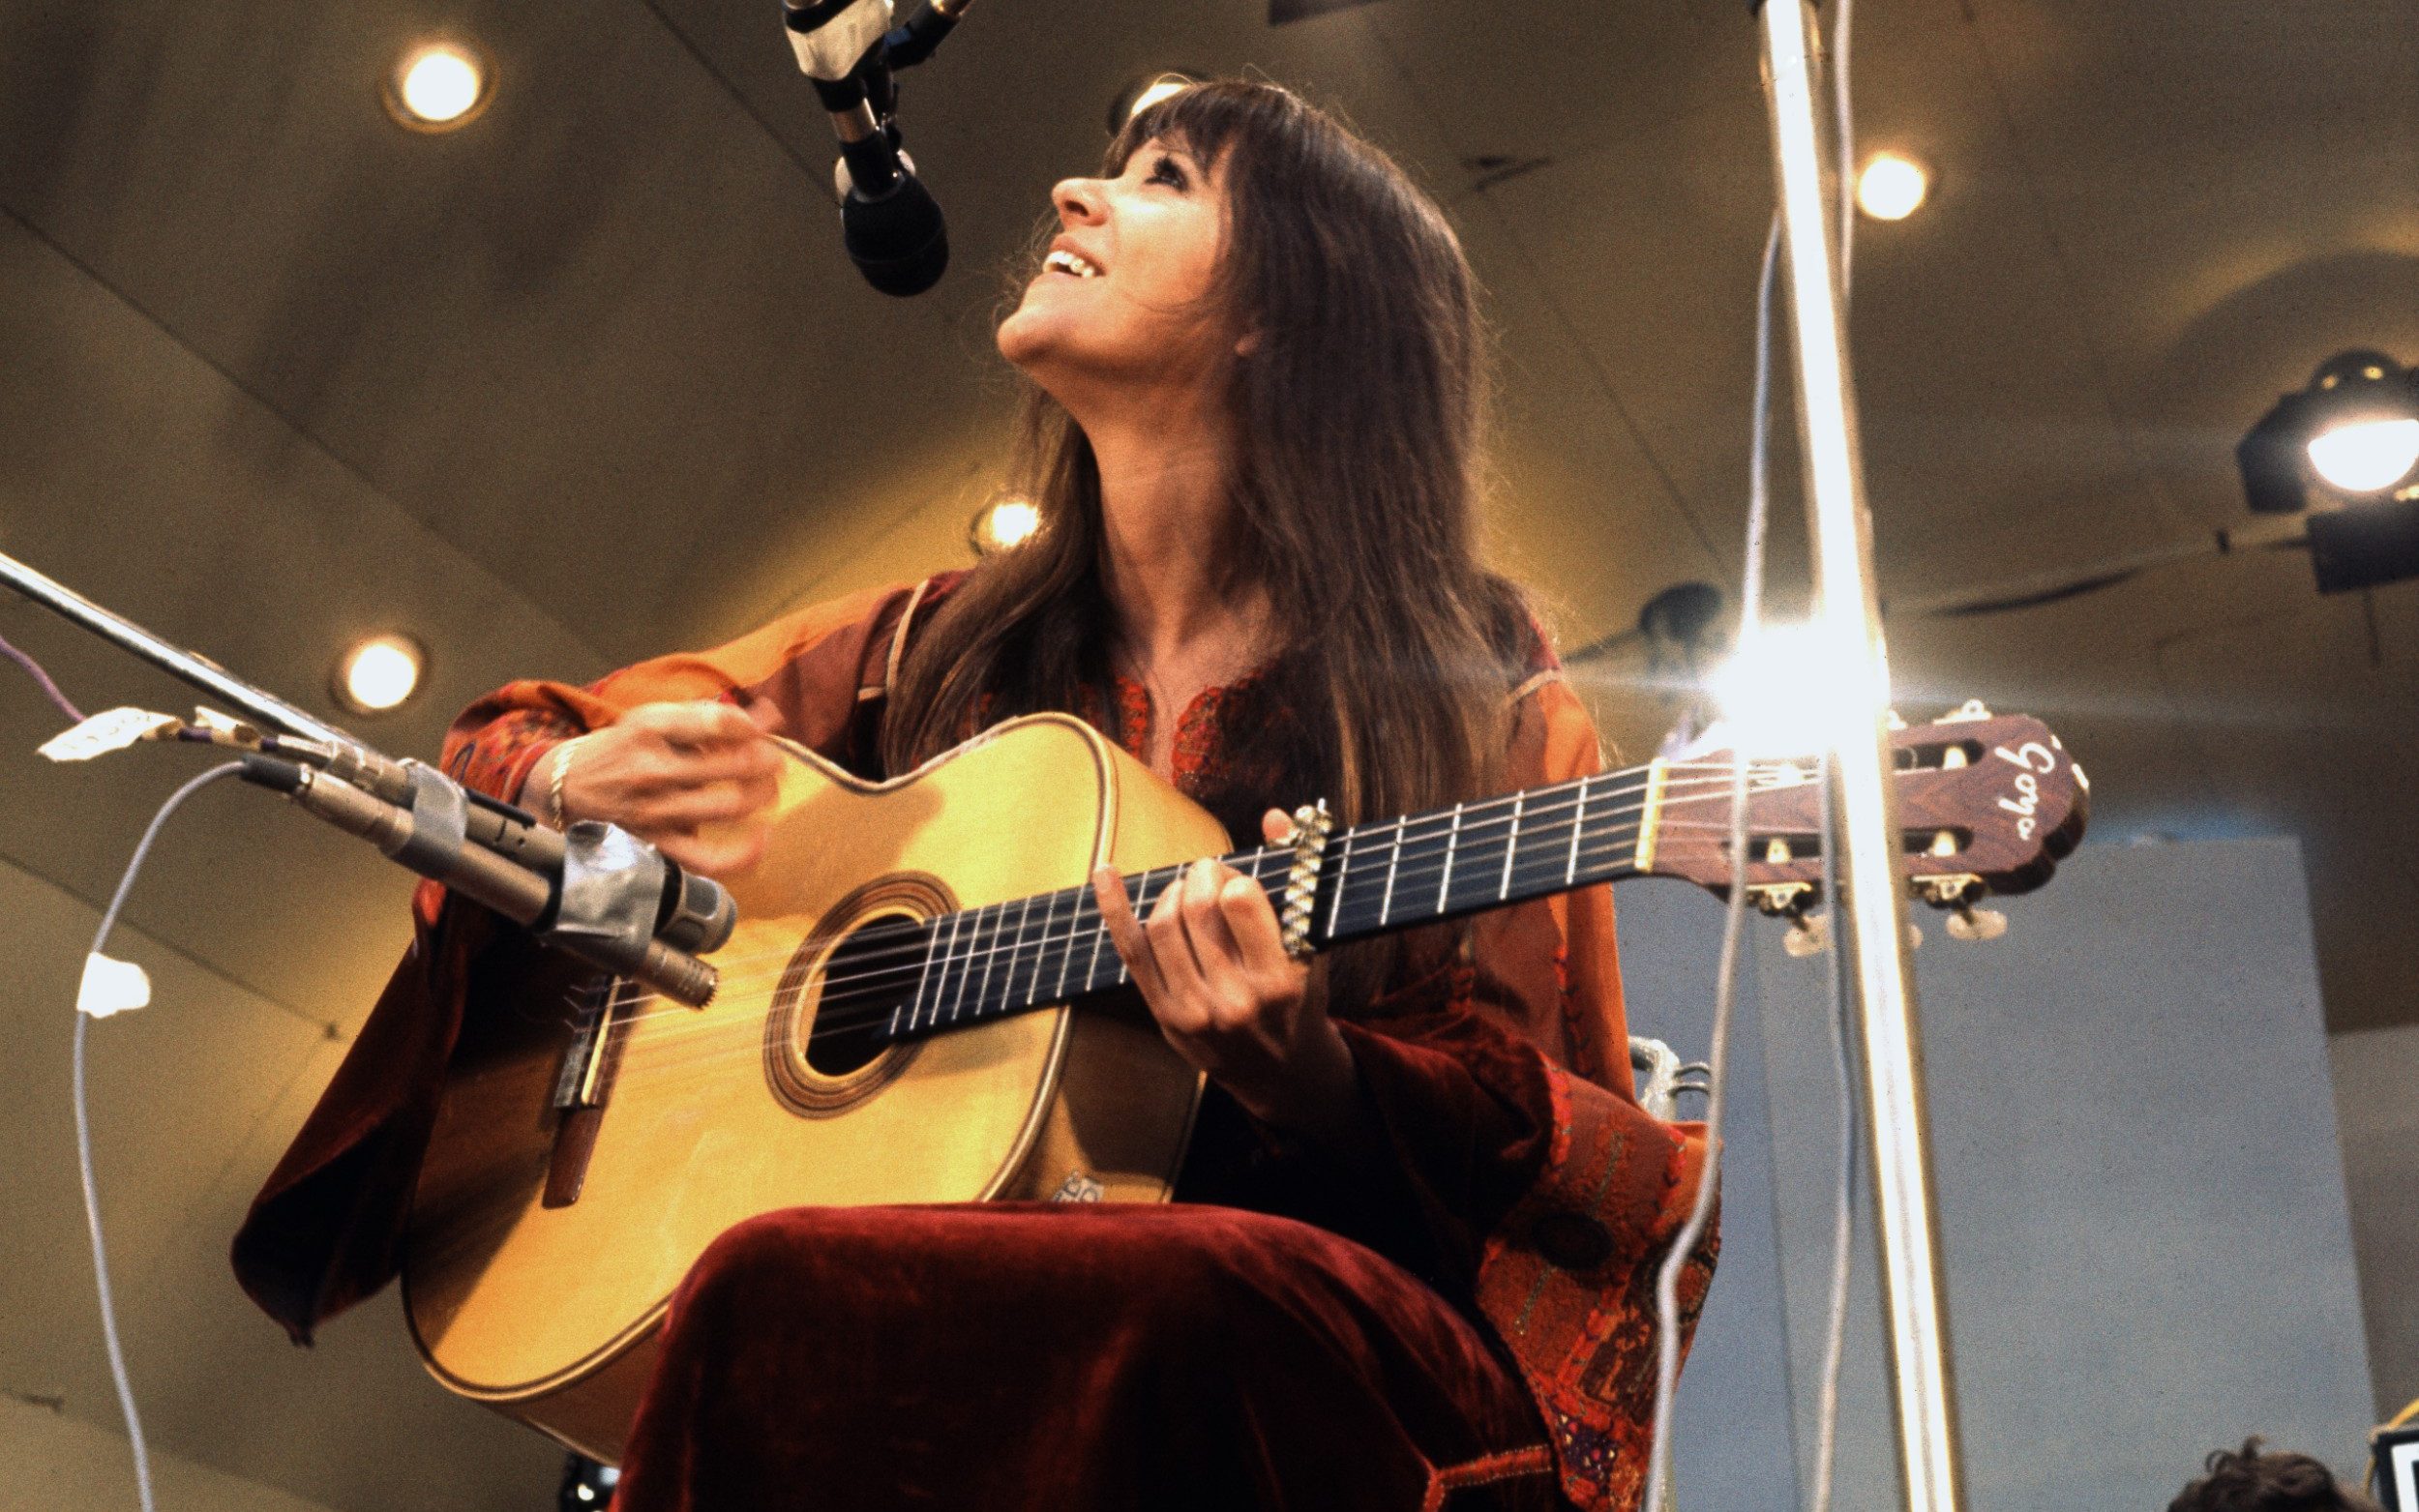 melanie, singer and songwriter whose career took off at one o’clock in the morning at woodstock – obituary